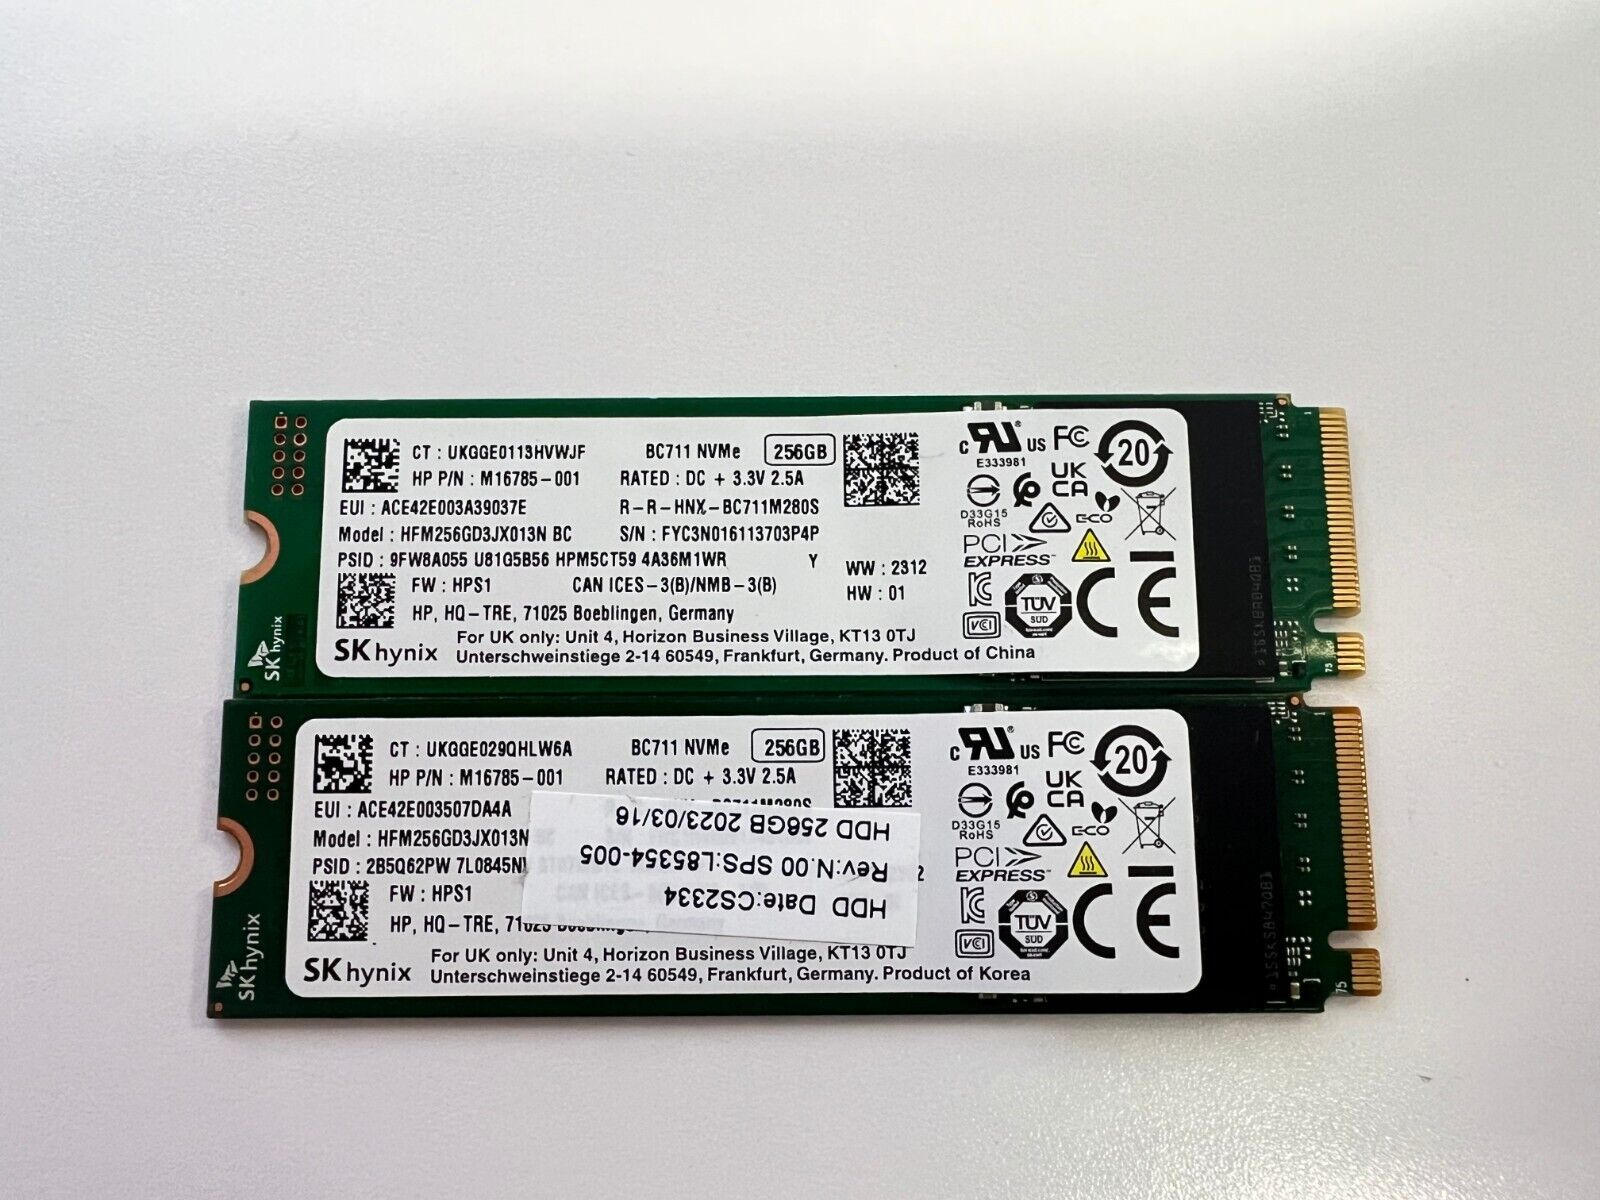 SK Hynix 256GB M.2 2280 PCIe SSD (Solid State Drive) NVMe